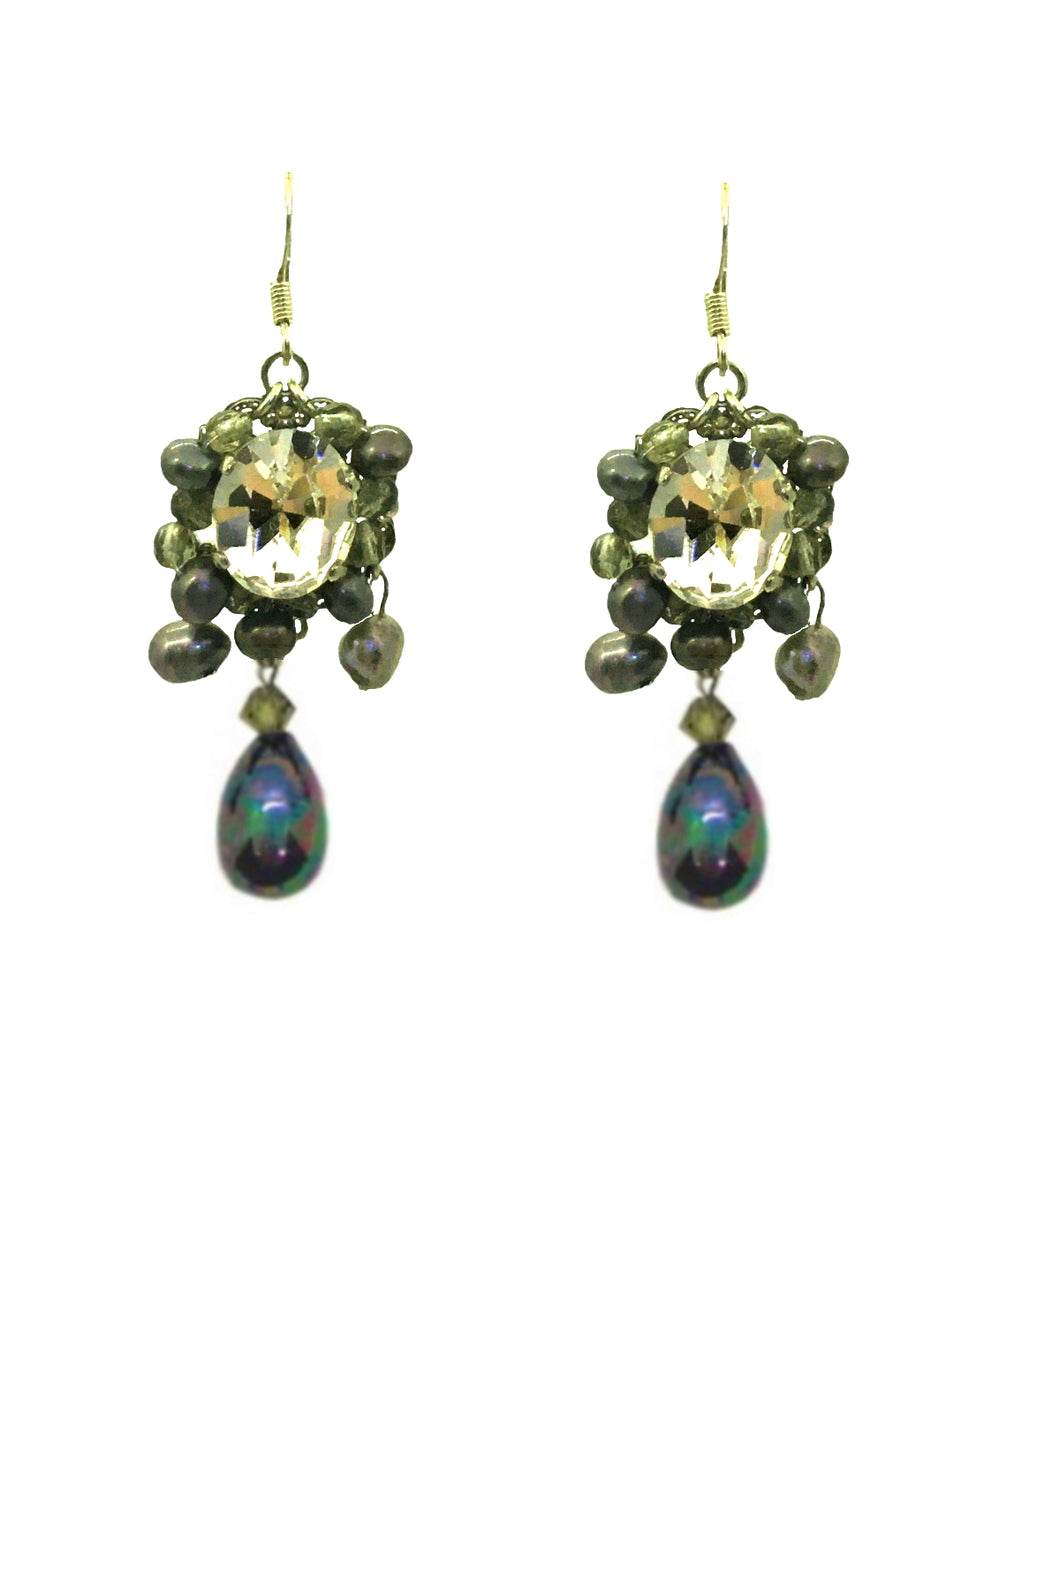 Baroque Freshwater Pearls and Crystals Brazil earrings